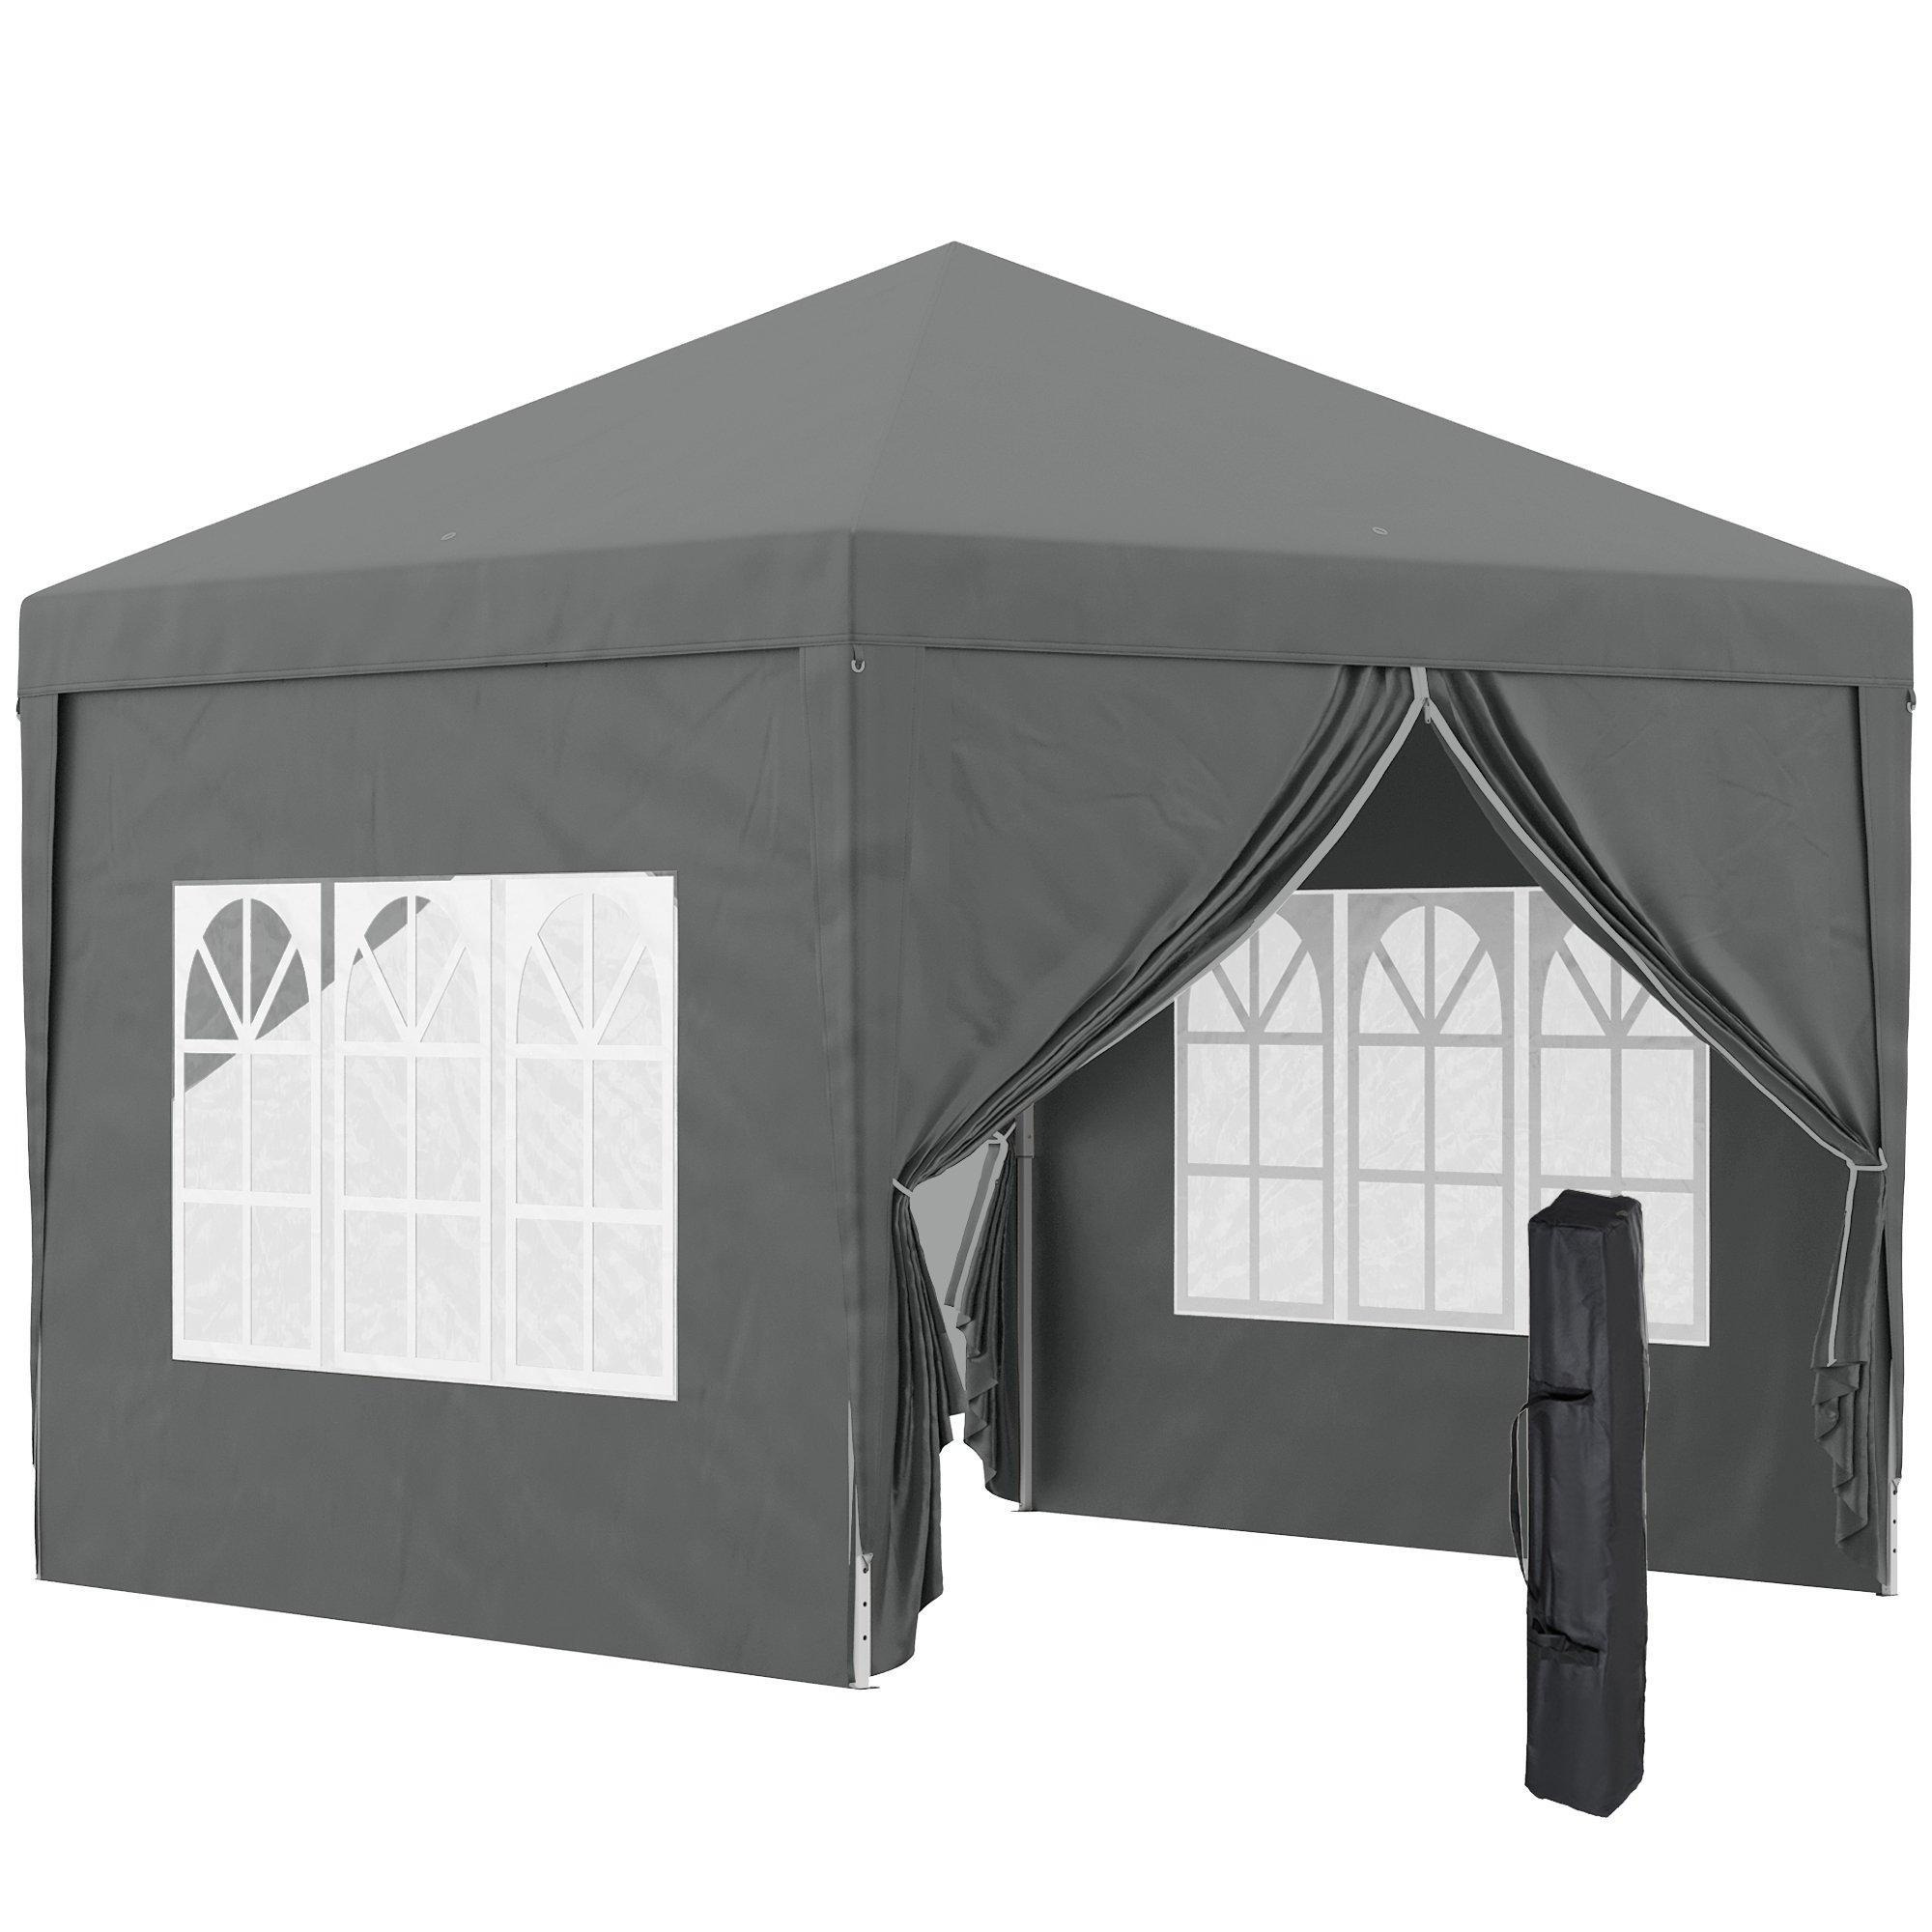 3mx3m Pop Up Gazebo Party Tent Canopy Marquee with Storage Bag - image 1